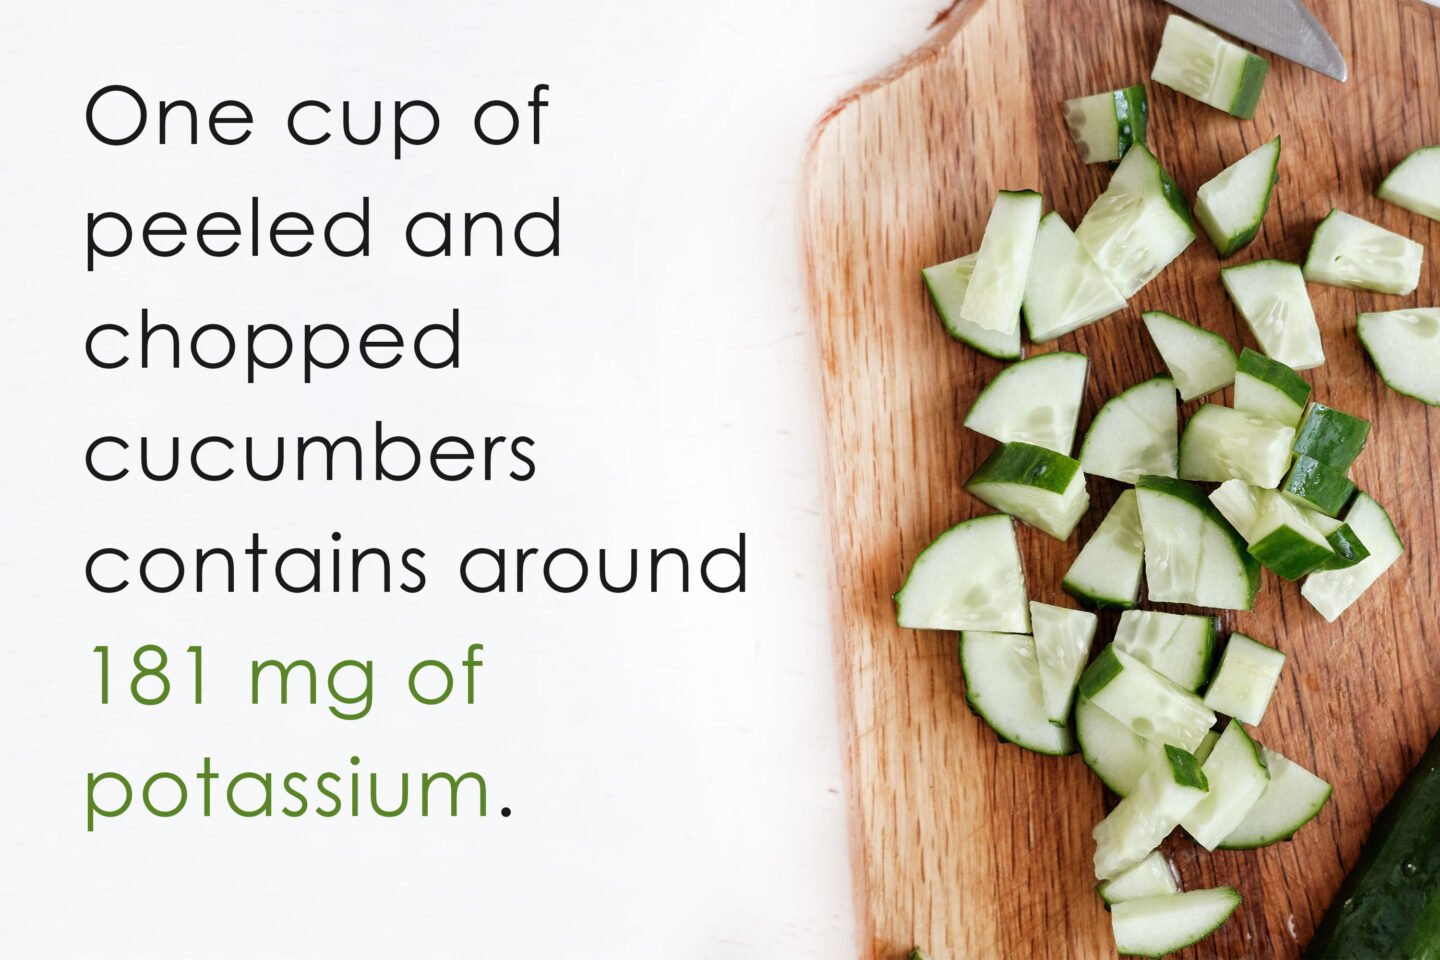 potassium in a cup of chopped cucumbers